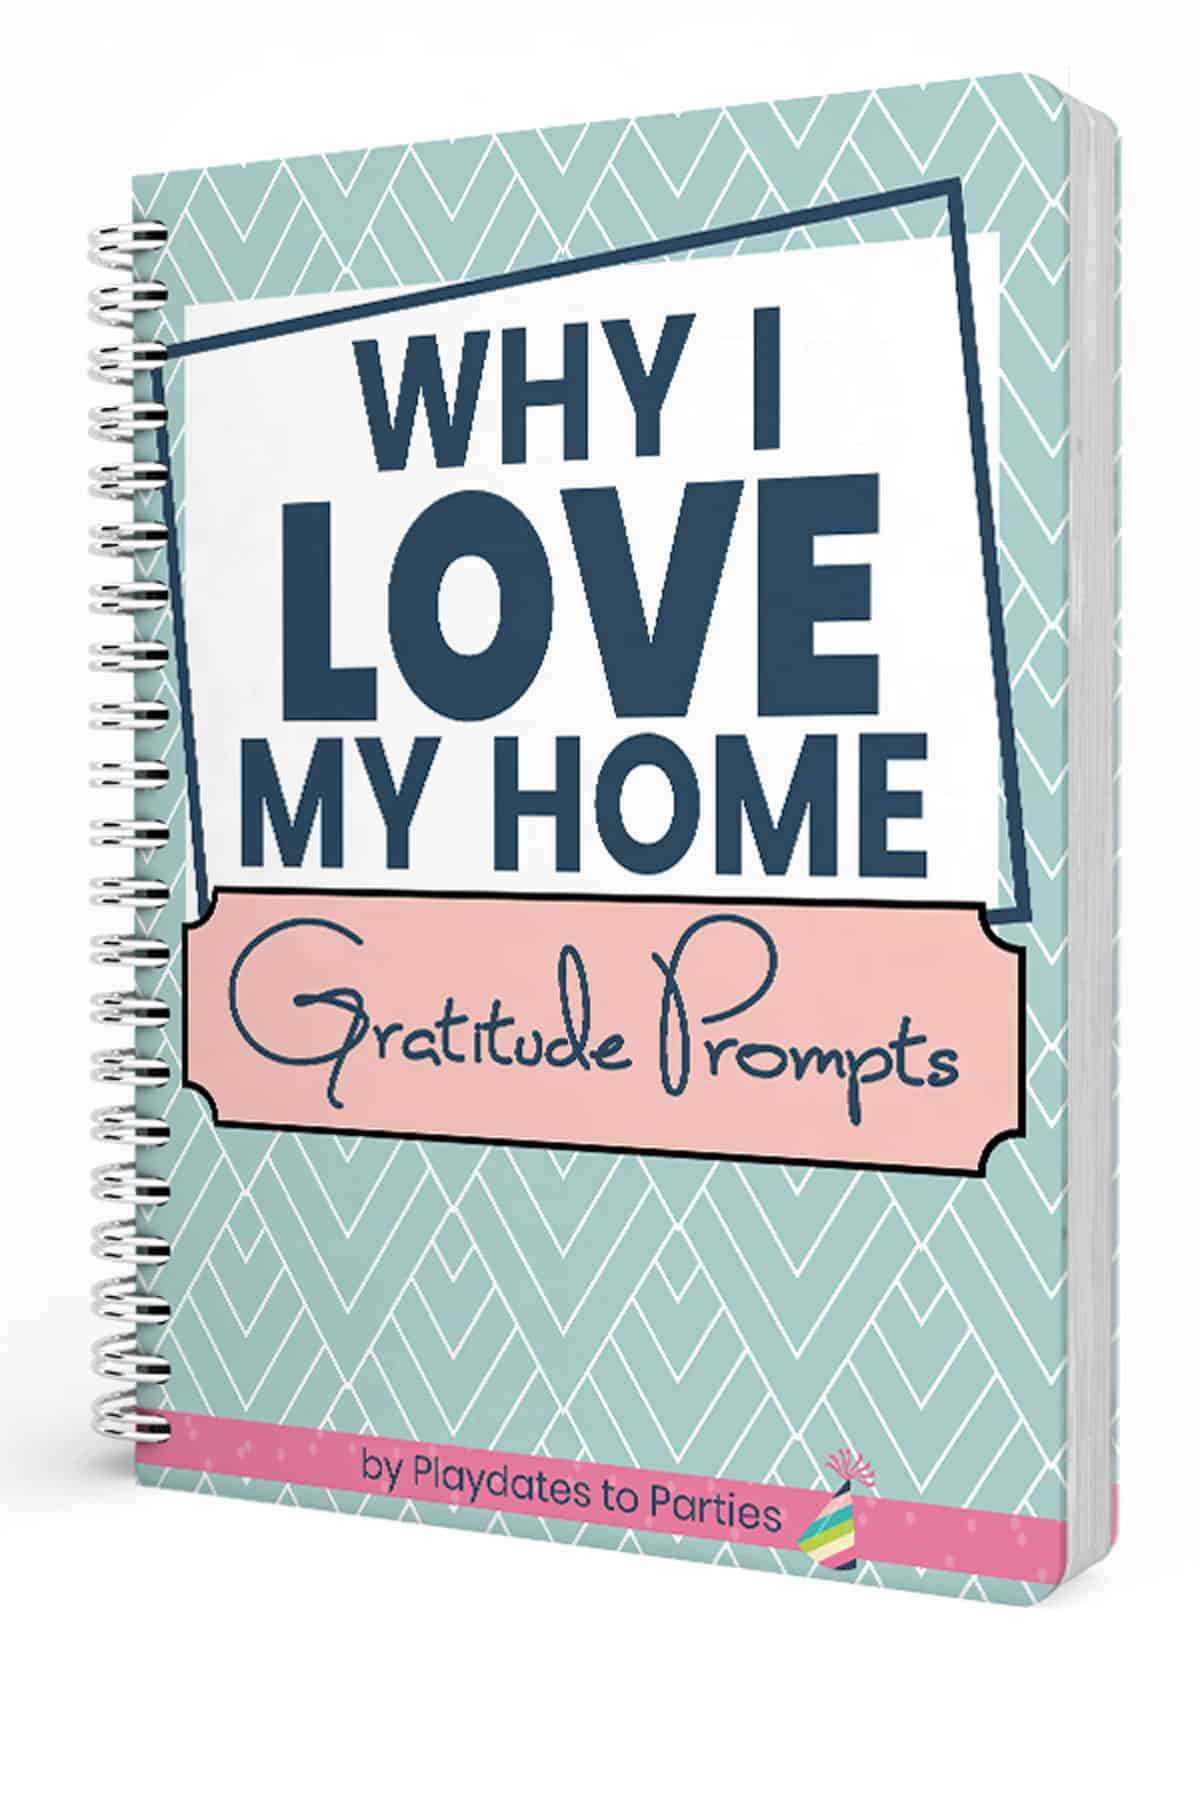 Love your home gratitude prompts